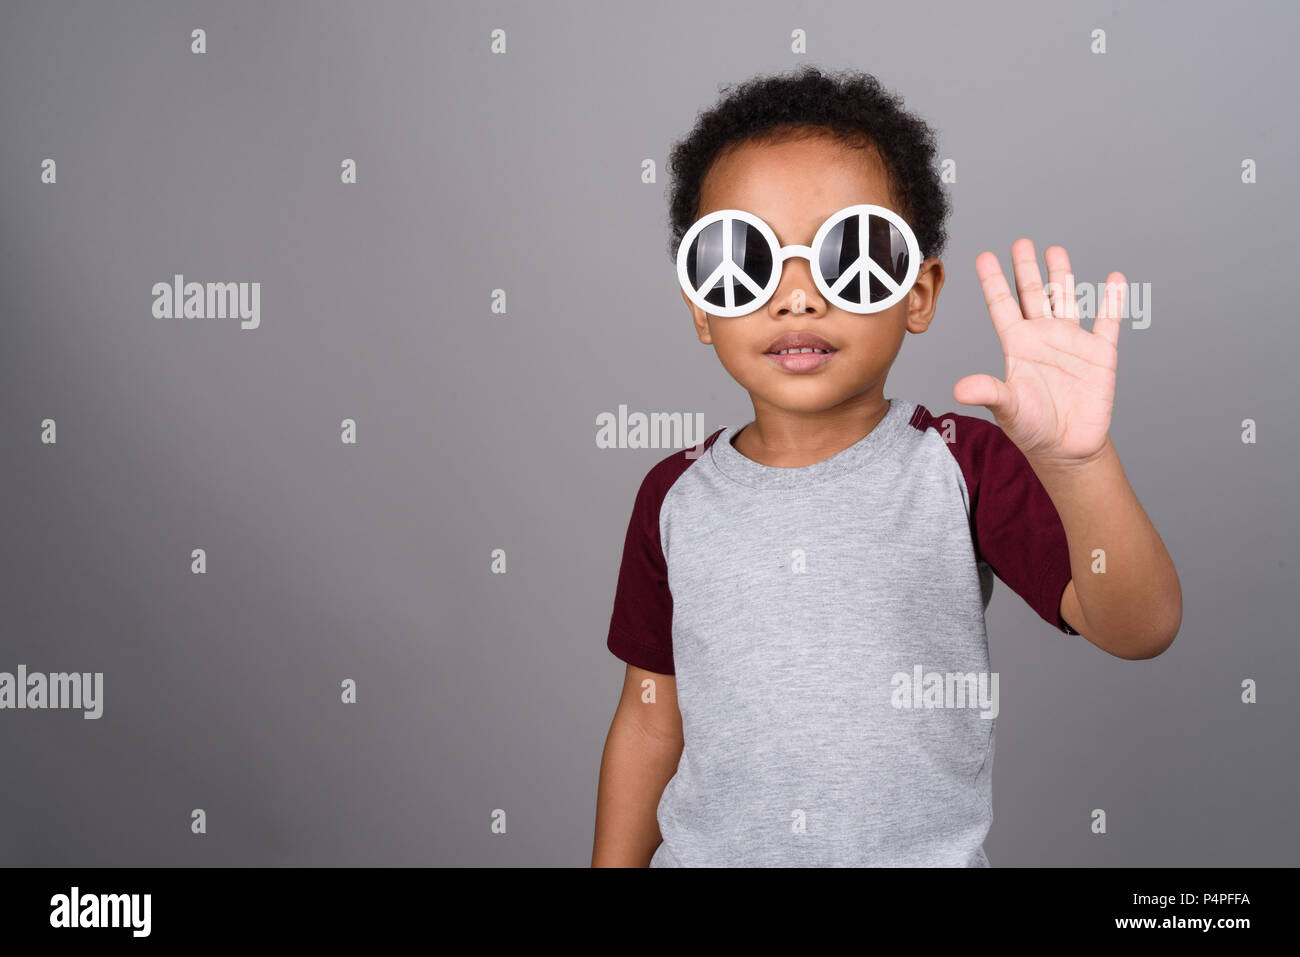 Young cute African boy against gray background Stock Photo